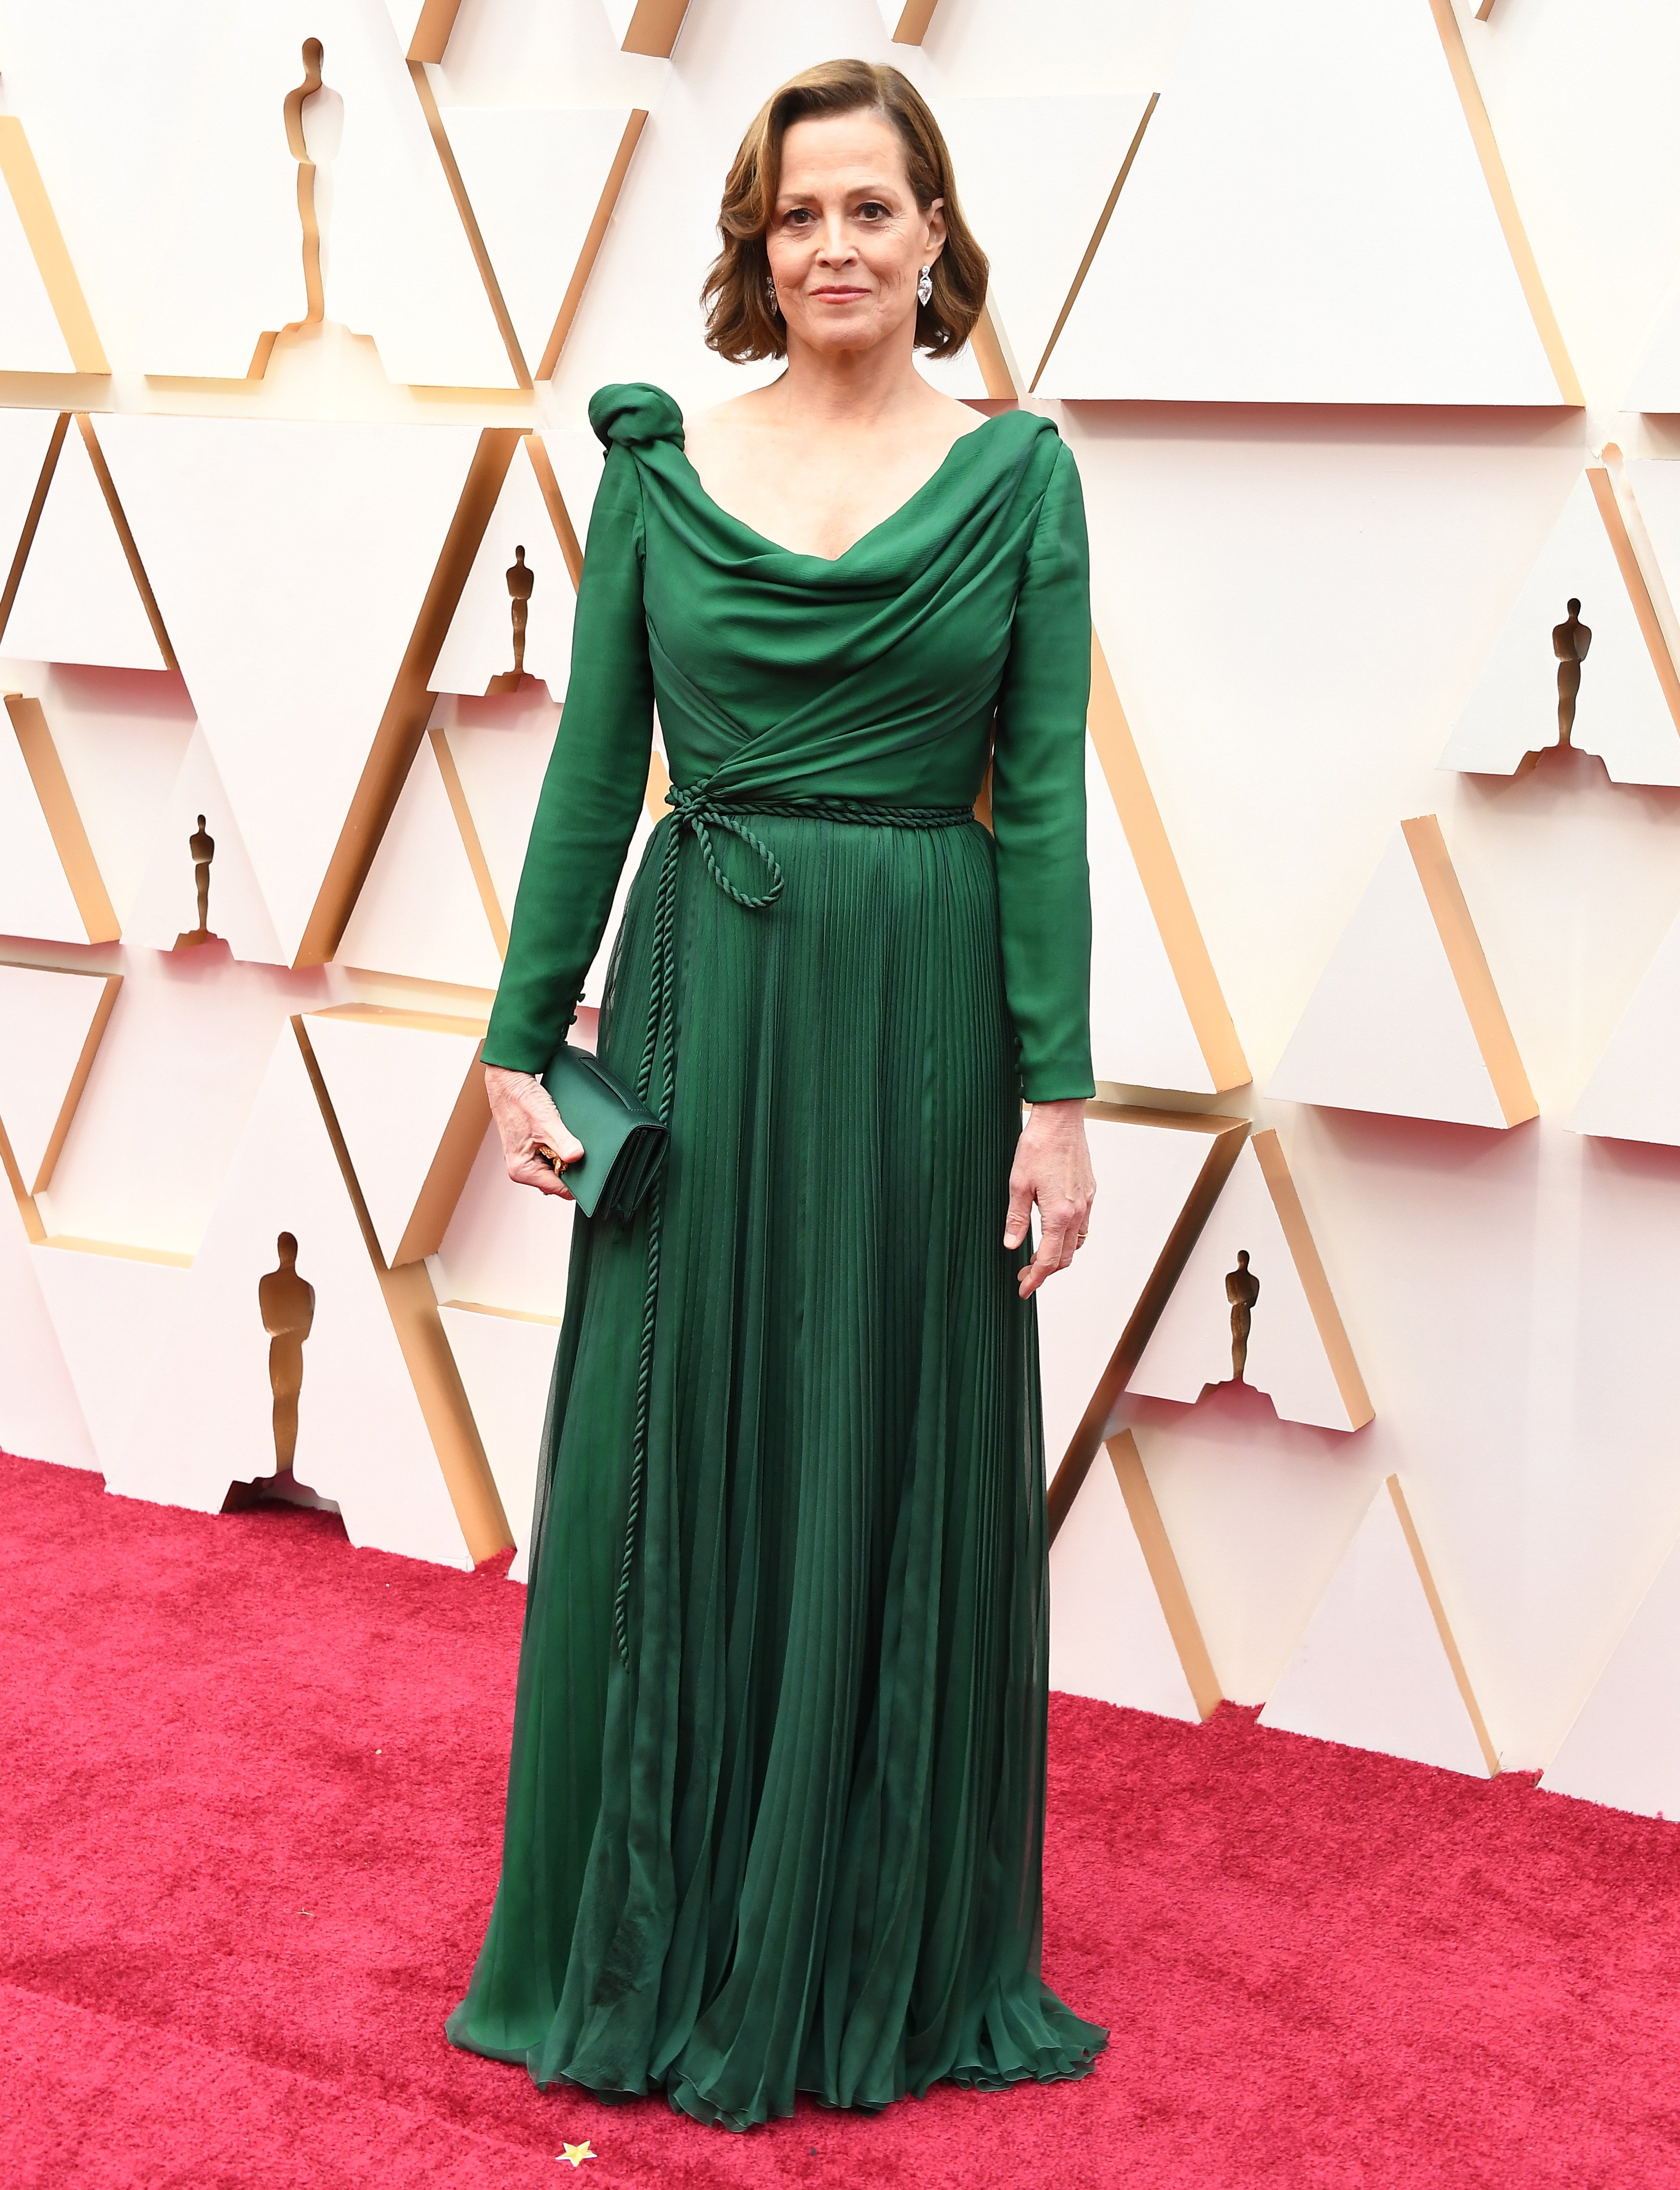 Sigourney Weaver at the Oscars on February 09, 2020 in Hollywood, California | Source: Getty Images